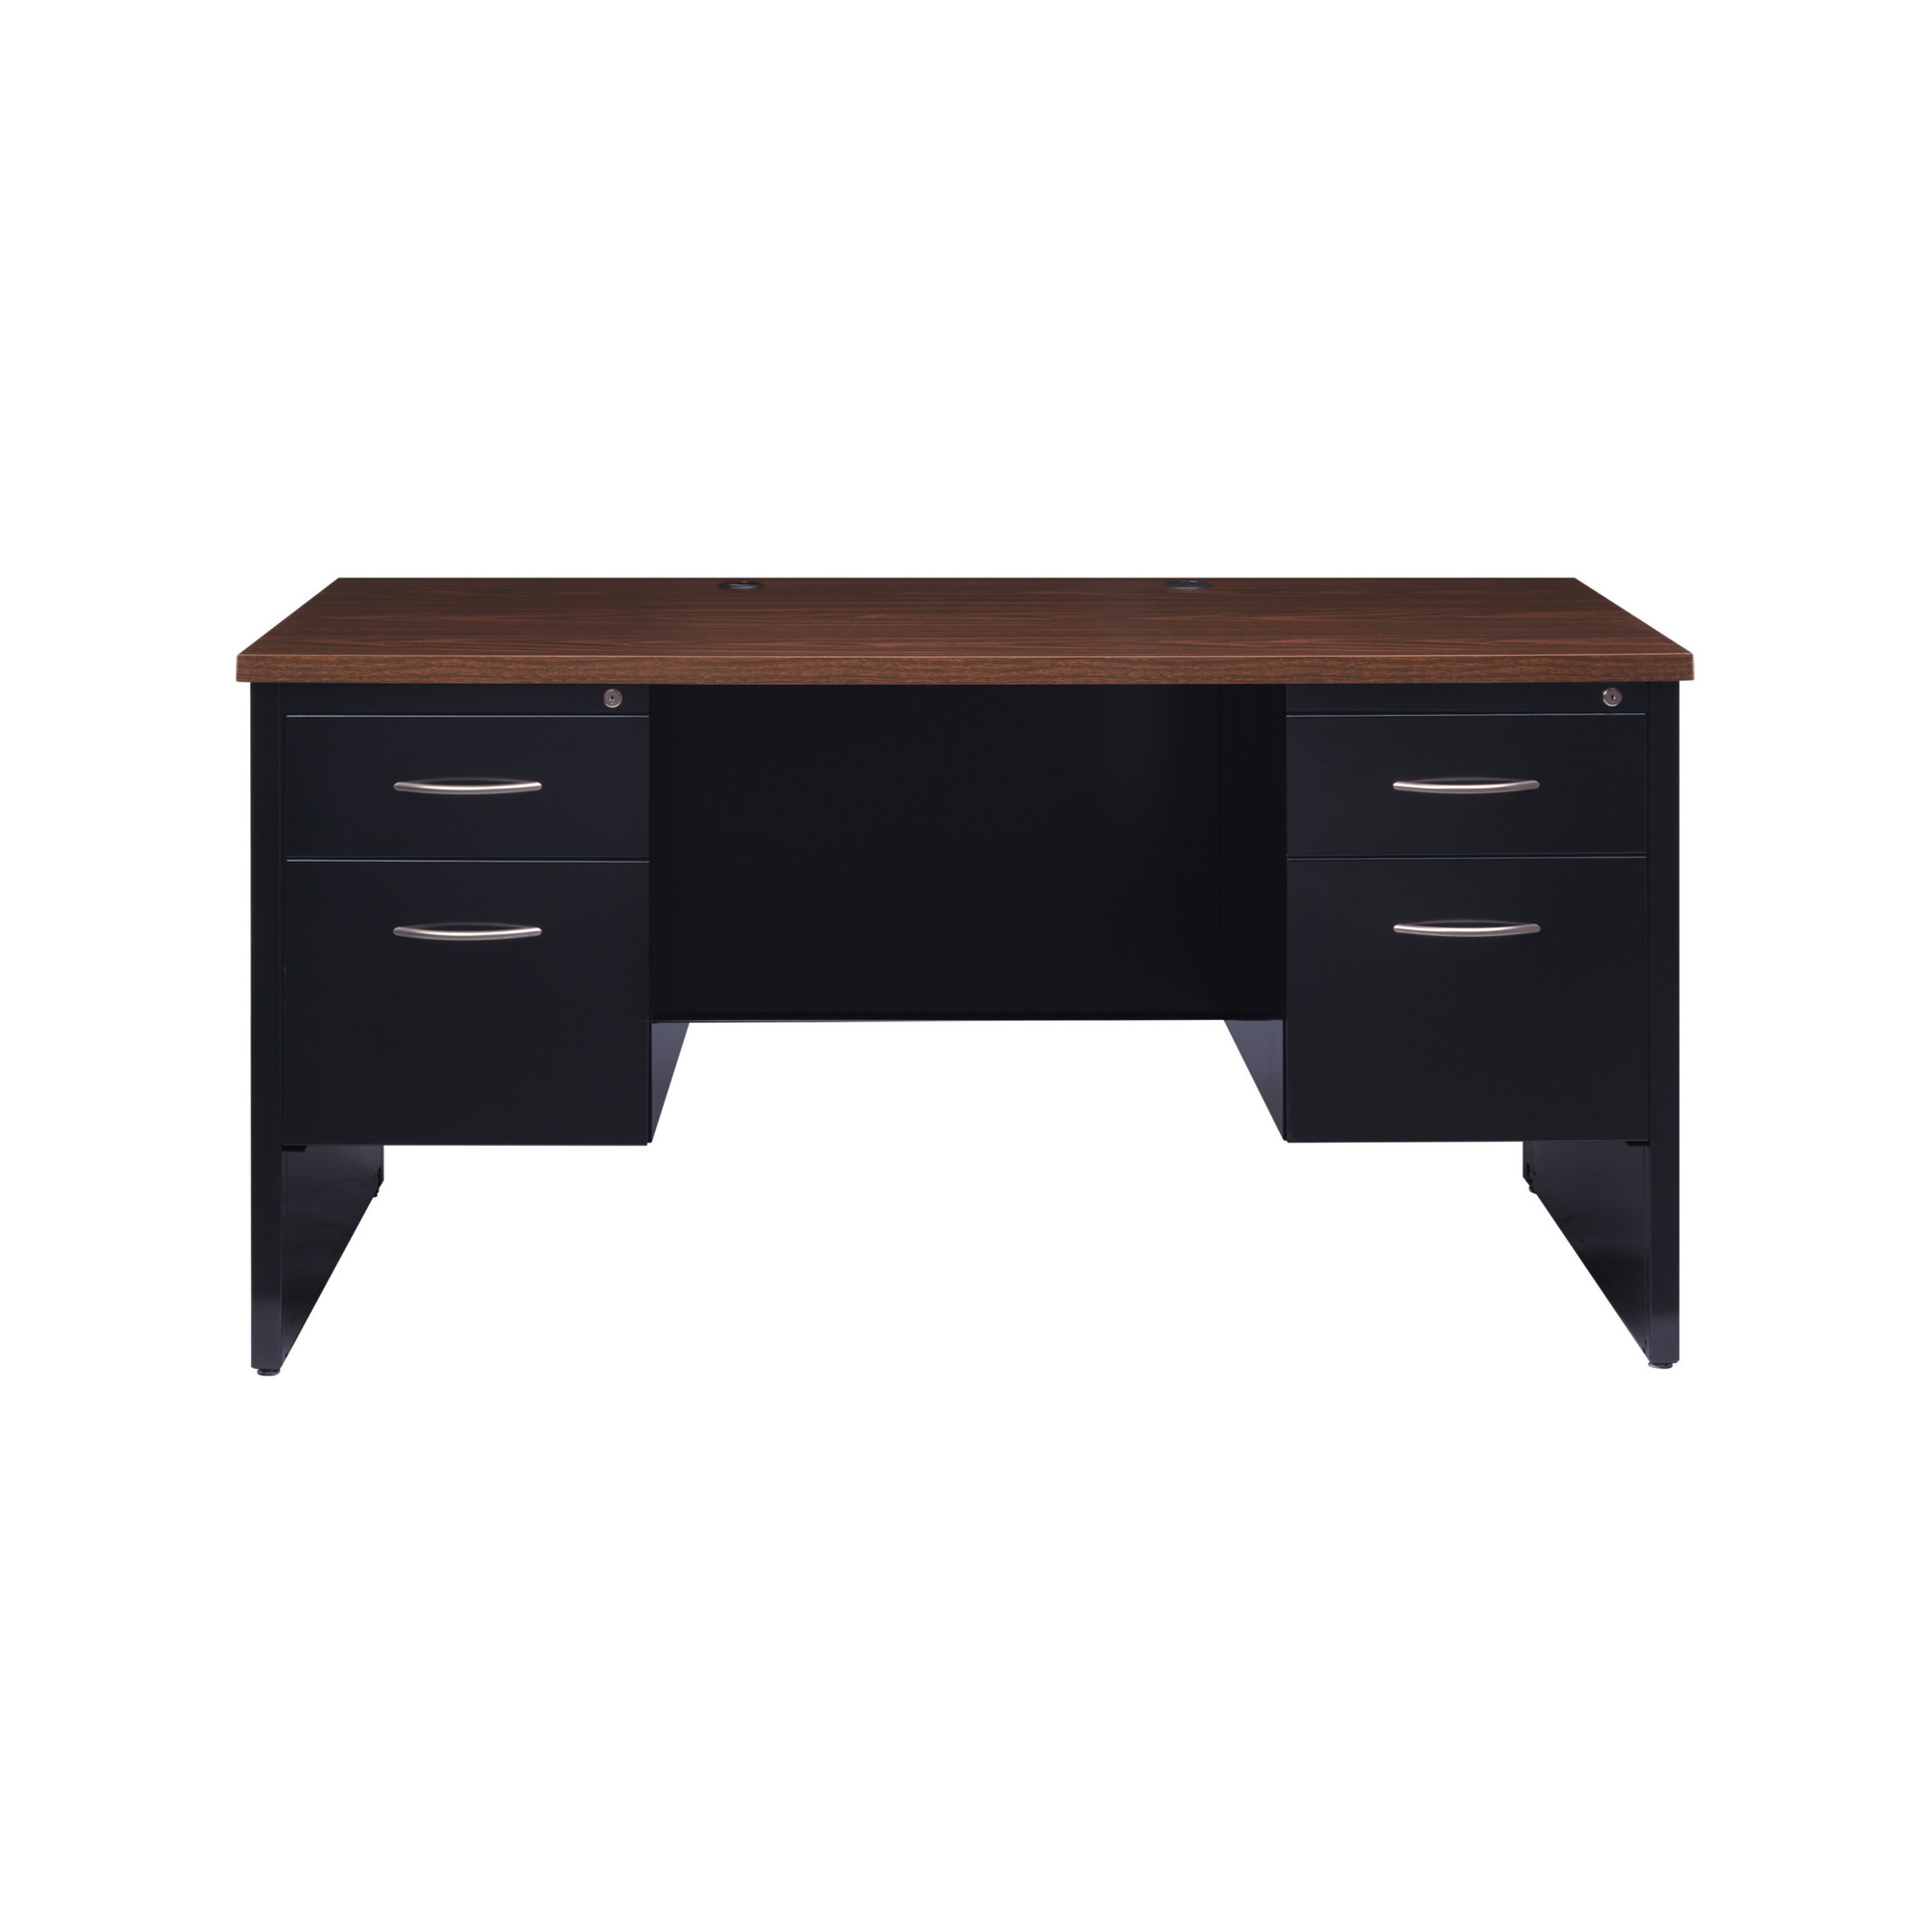 Executive Modular Double Ped File Office Desk, Width 60 in, Height 29.5 in, Depth 30 in, Model - Hirsh Industries 20533